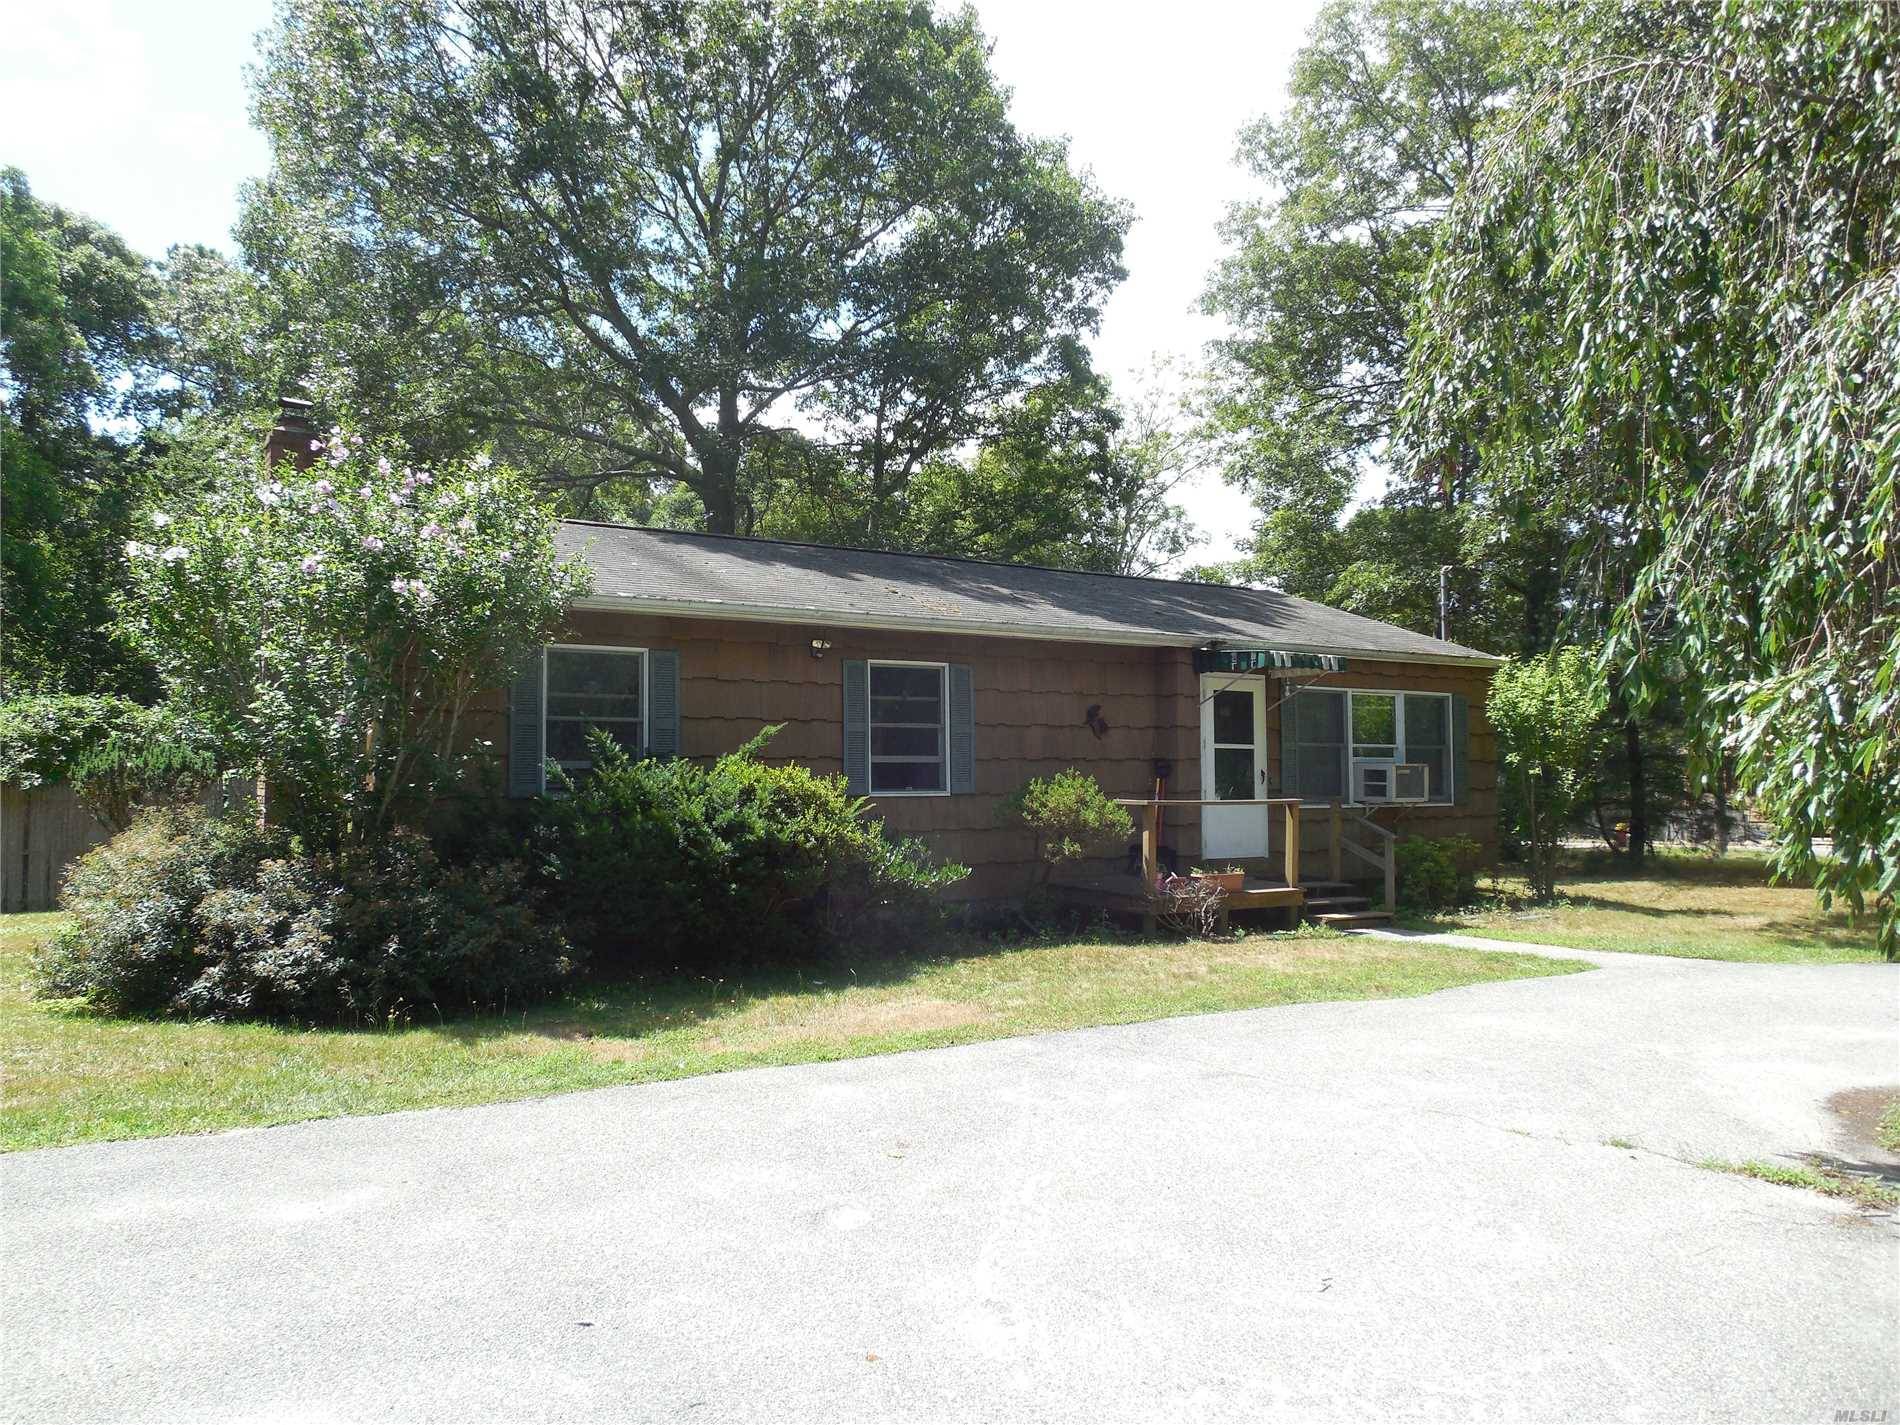 Great Location Close To Hampton Bays Town & Train, 3 Bedroom Contemporary Ranch With Wood Floors & Full Basement.